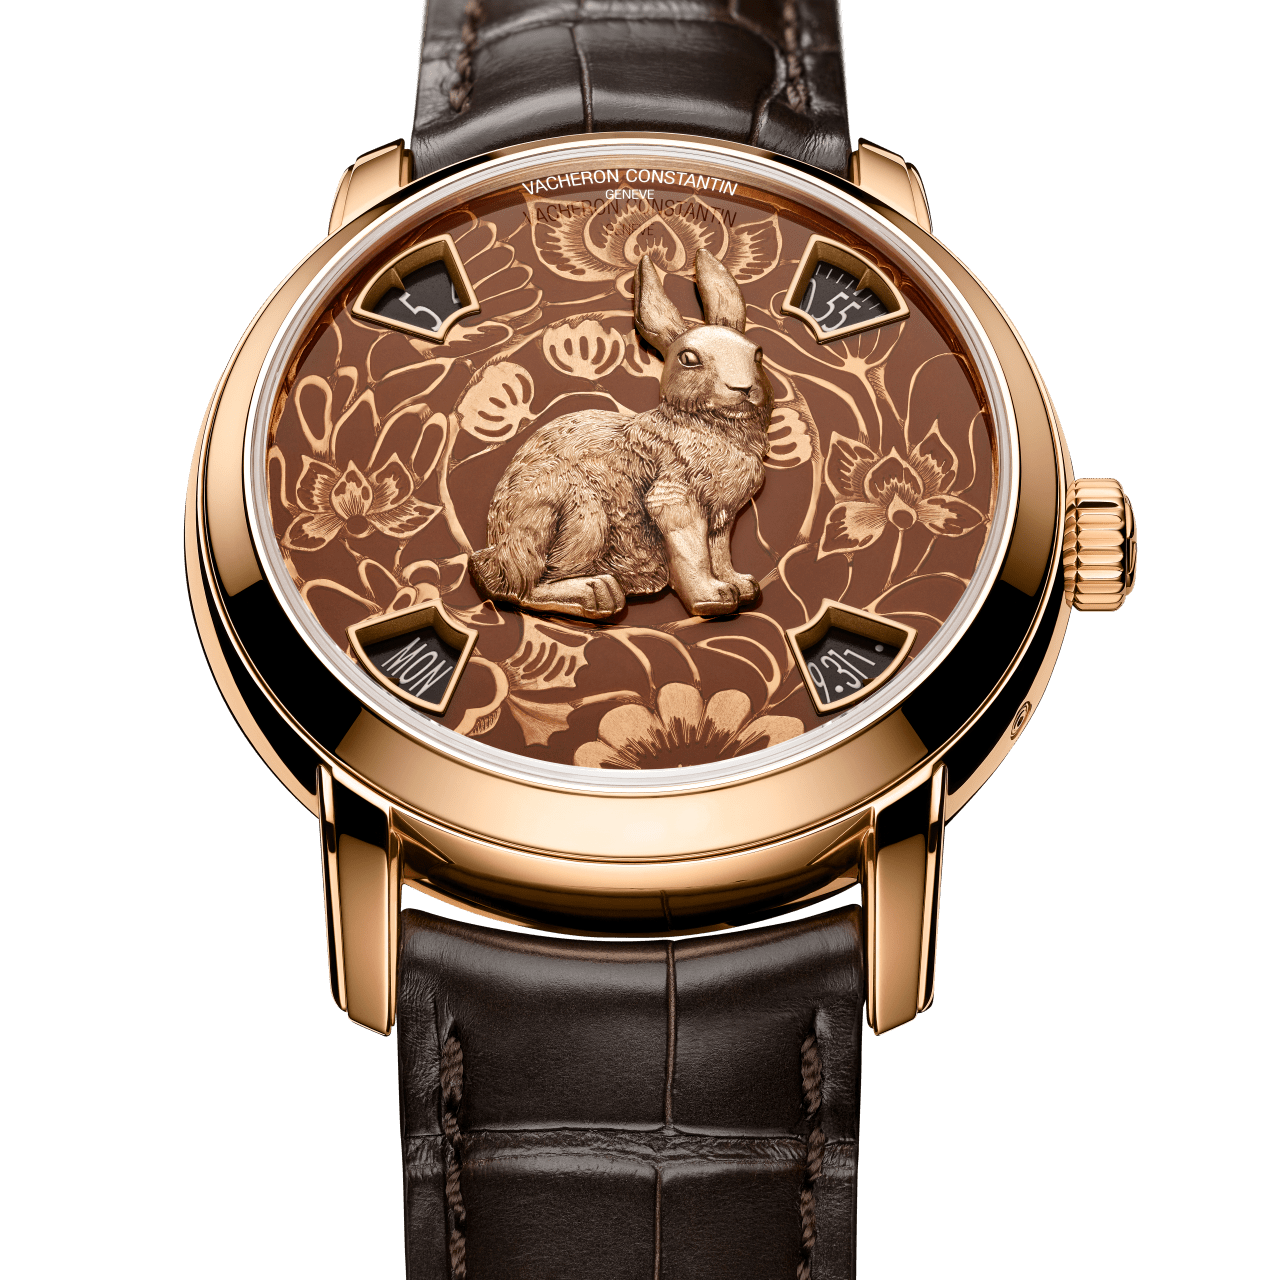 Vacheron Constantin Métiers d?Art: The Legend of the Chinese Zodiac in the Year of the Rabbit